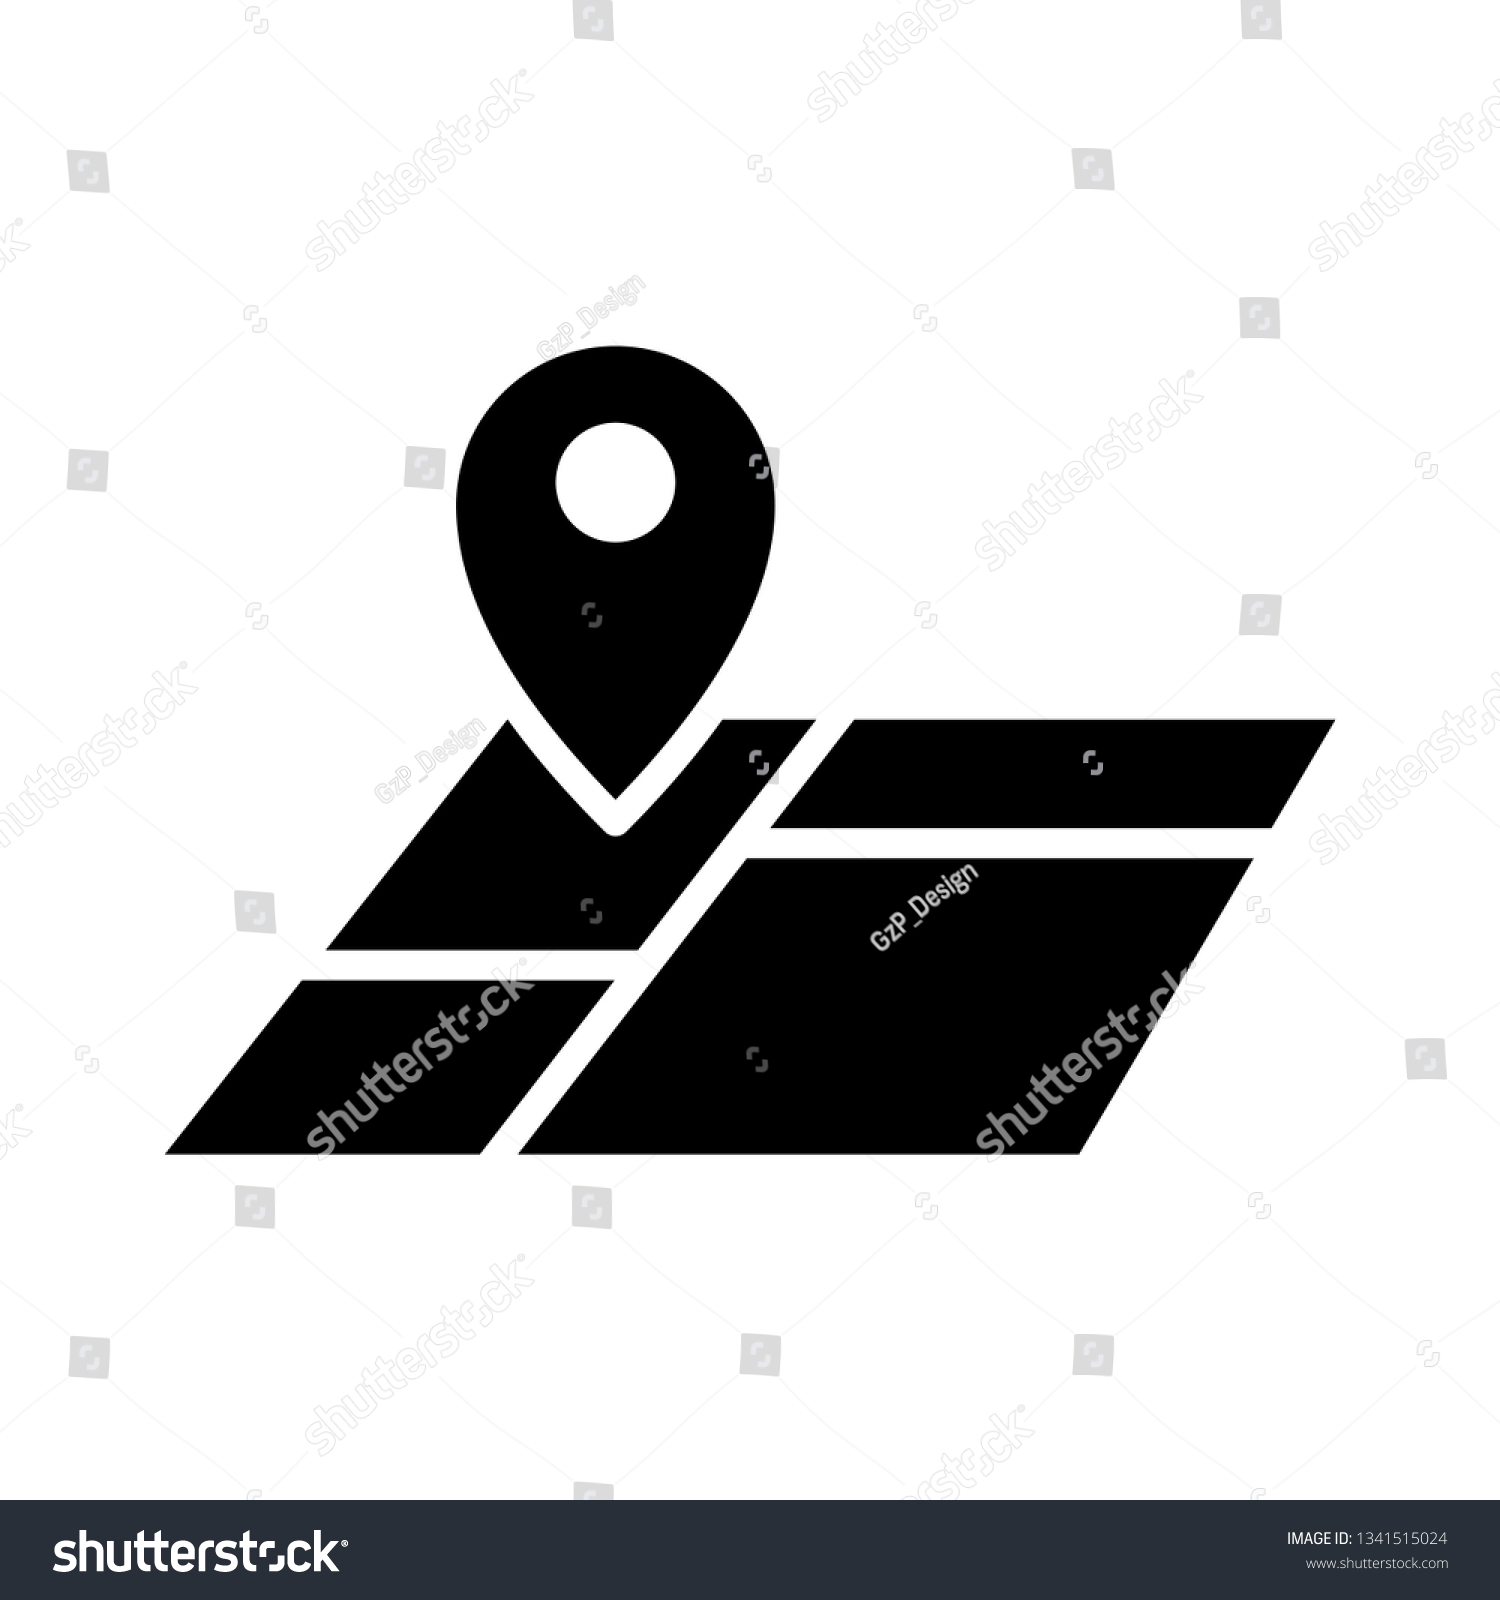 land on map icon #1341515024